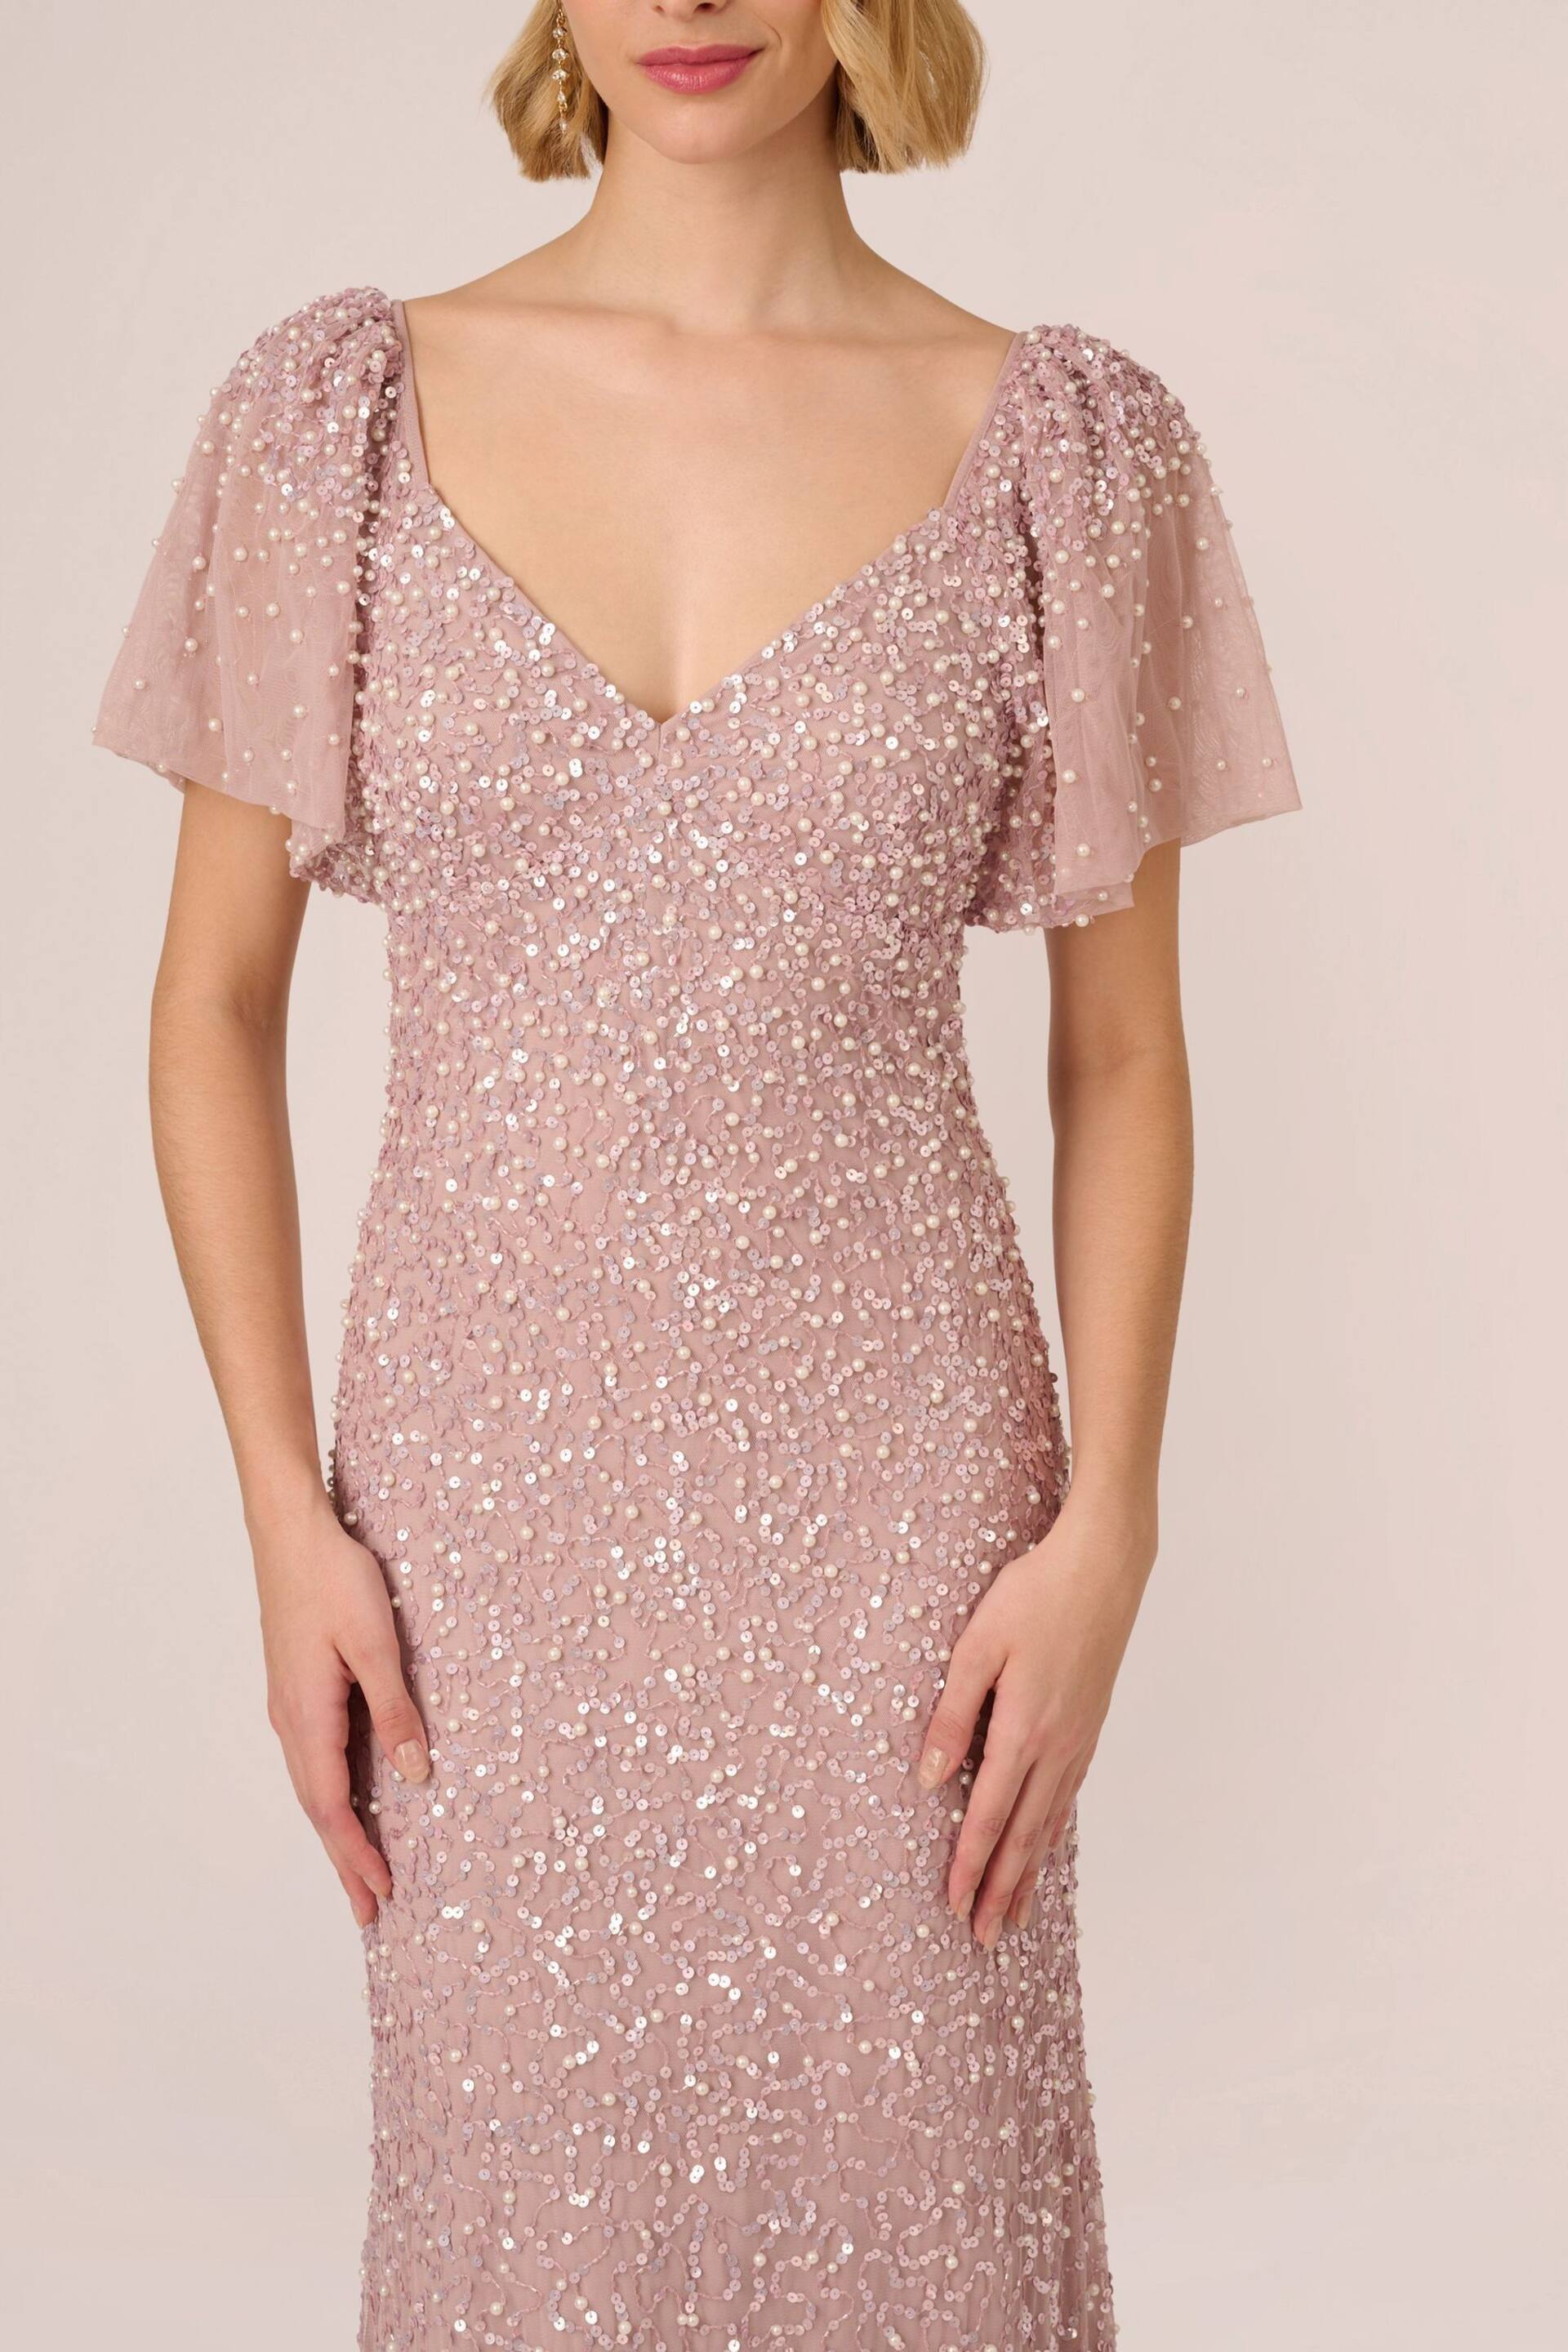 Adrianna Papell Pink V-Neck Beaded Mesh Long Dress - Image 4 of 7